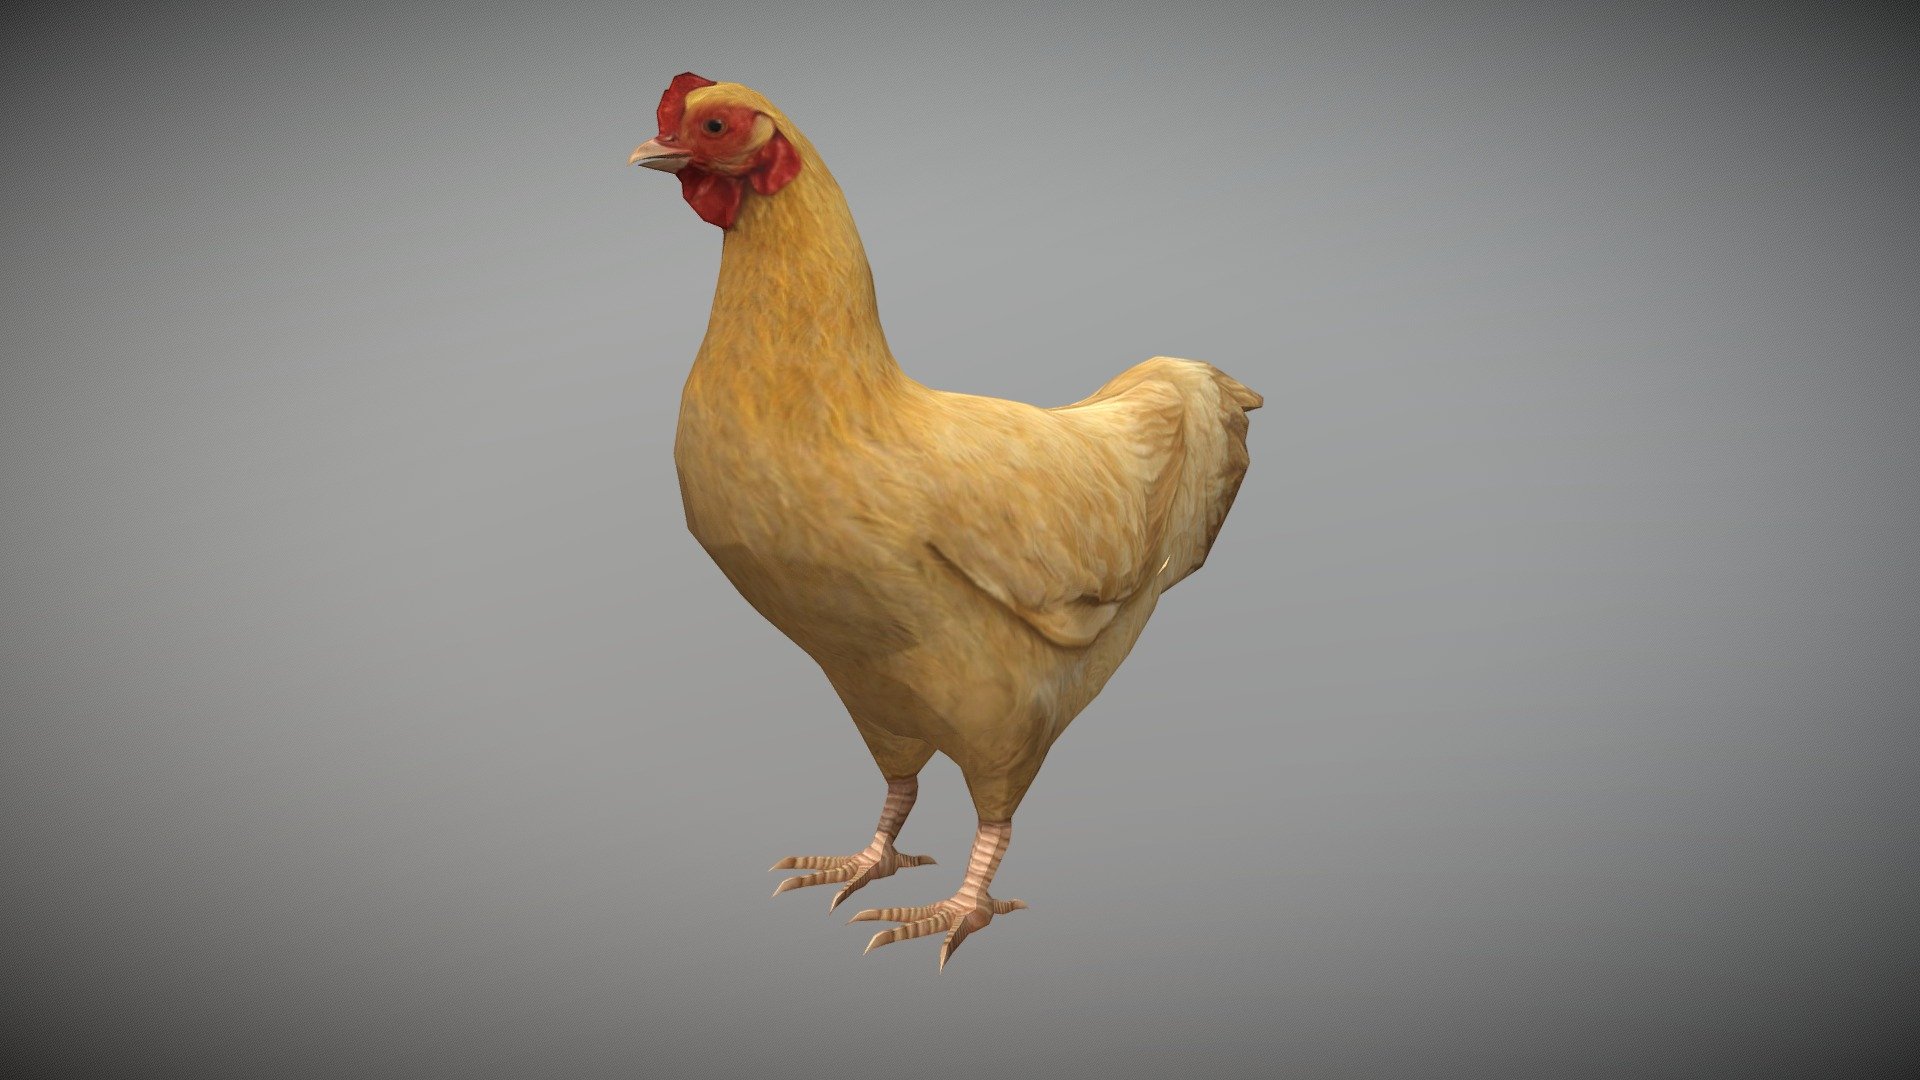 WATCH = https://youtu.be/6MZWp7julbM

3D Realistic Hen Chicken with Animations

PACKAGE INCLUDE




High quality polygonal model, correctly scaled for an accurate representation of the original object.

Model is built to real-world scale.

Many different format like blender, fbx, obj, iclone, dae

No additional plugin is needed to open the model.

3d print ready in different poses

Separate Loopable Animations

Ready for animation

High Quality materials and textures

Triangles = 1561

Vertices = 784

Edges = 2343

Faces = 1561

ANIMATIONS




Idle

Walk

Eat

3D PRINT POSES ( STL  OBJ )




Stand

Stand side look

Look Down

One Foot 1

One foot 2

Eat

Walk
 - Hen chicken Animated - Buy Royalty Free 3D model by Bilal Creation Production (@bilalcreation) 3d model